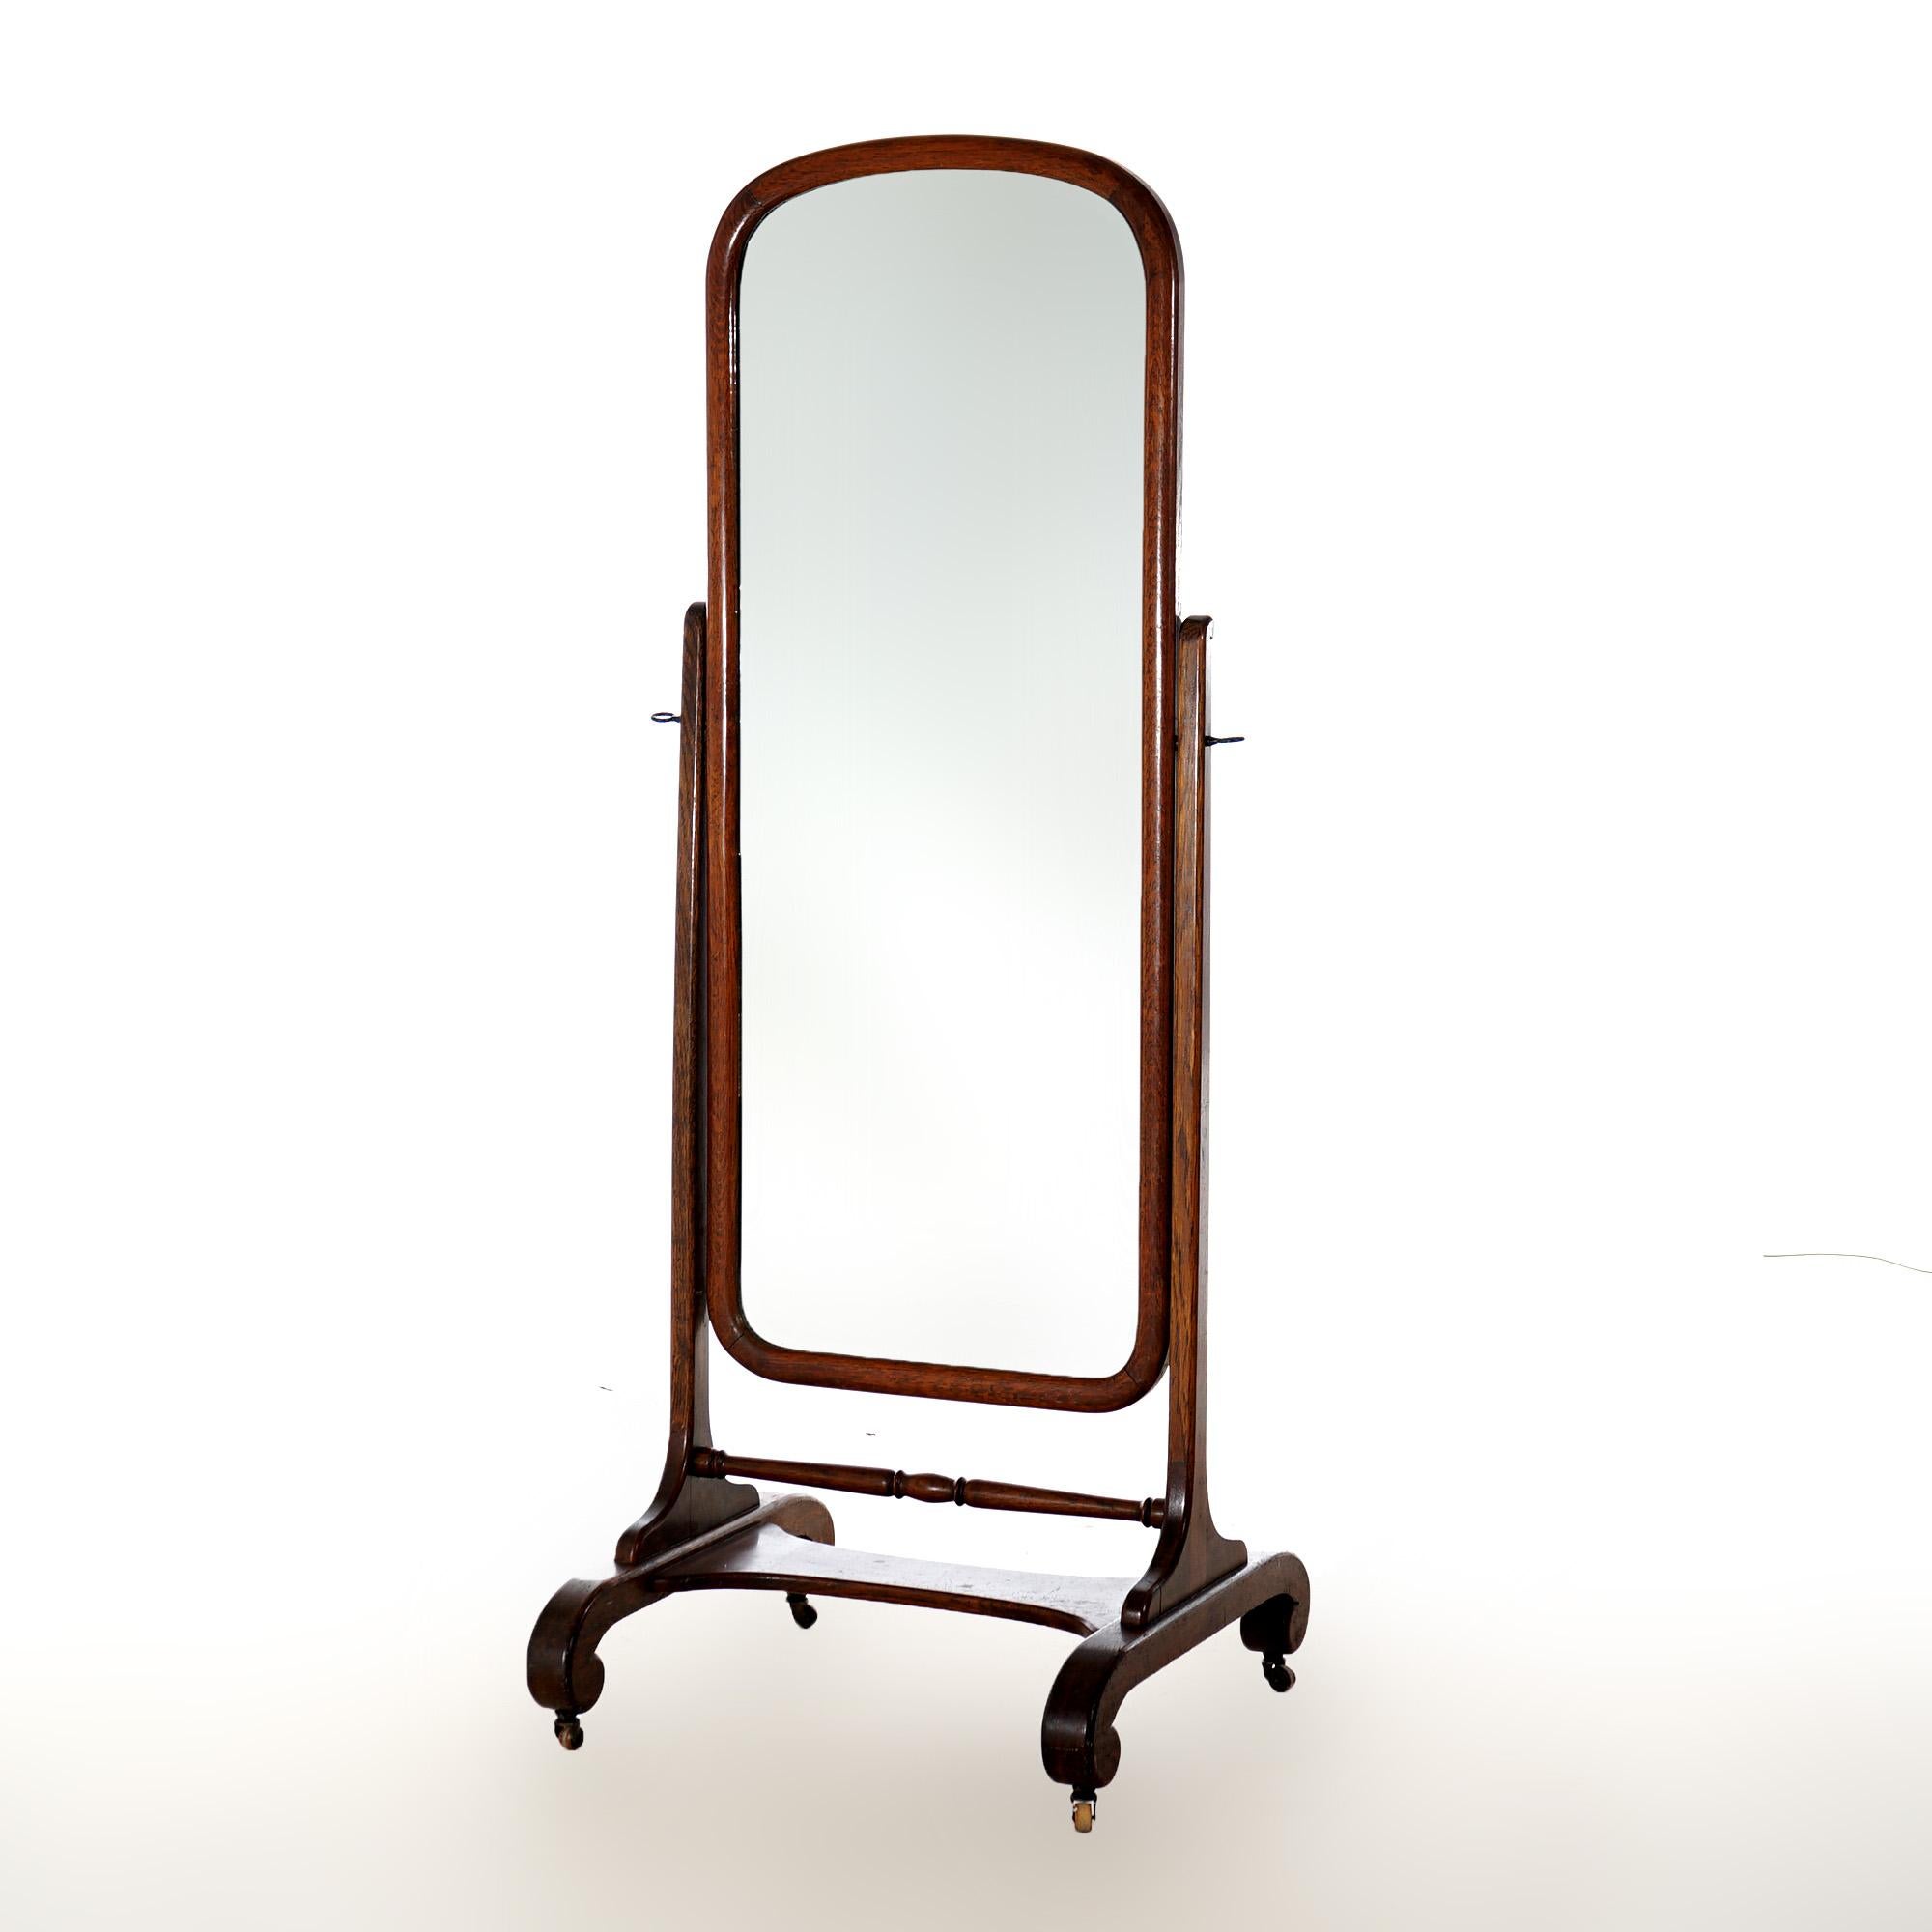 An antique Arts and Crafts cheval dressing mirror offers oak frame with full length mirror on base having turned stretcher and raised on scroll form legs, c1910

Measures - 68